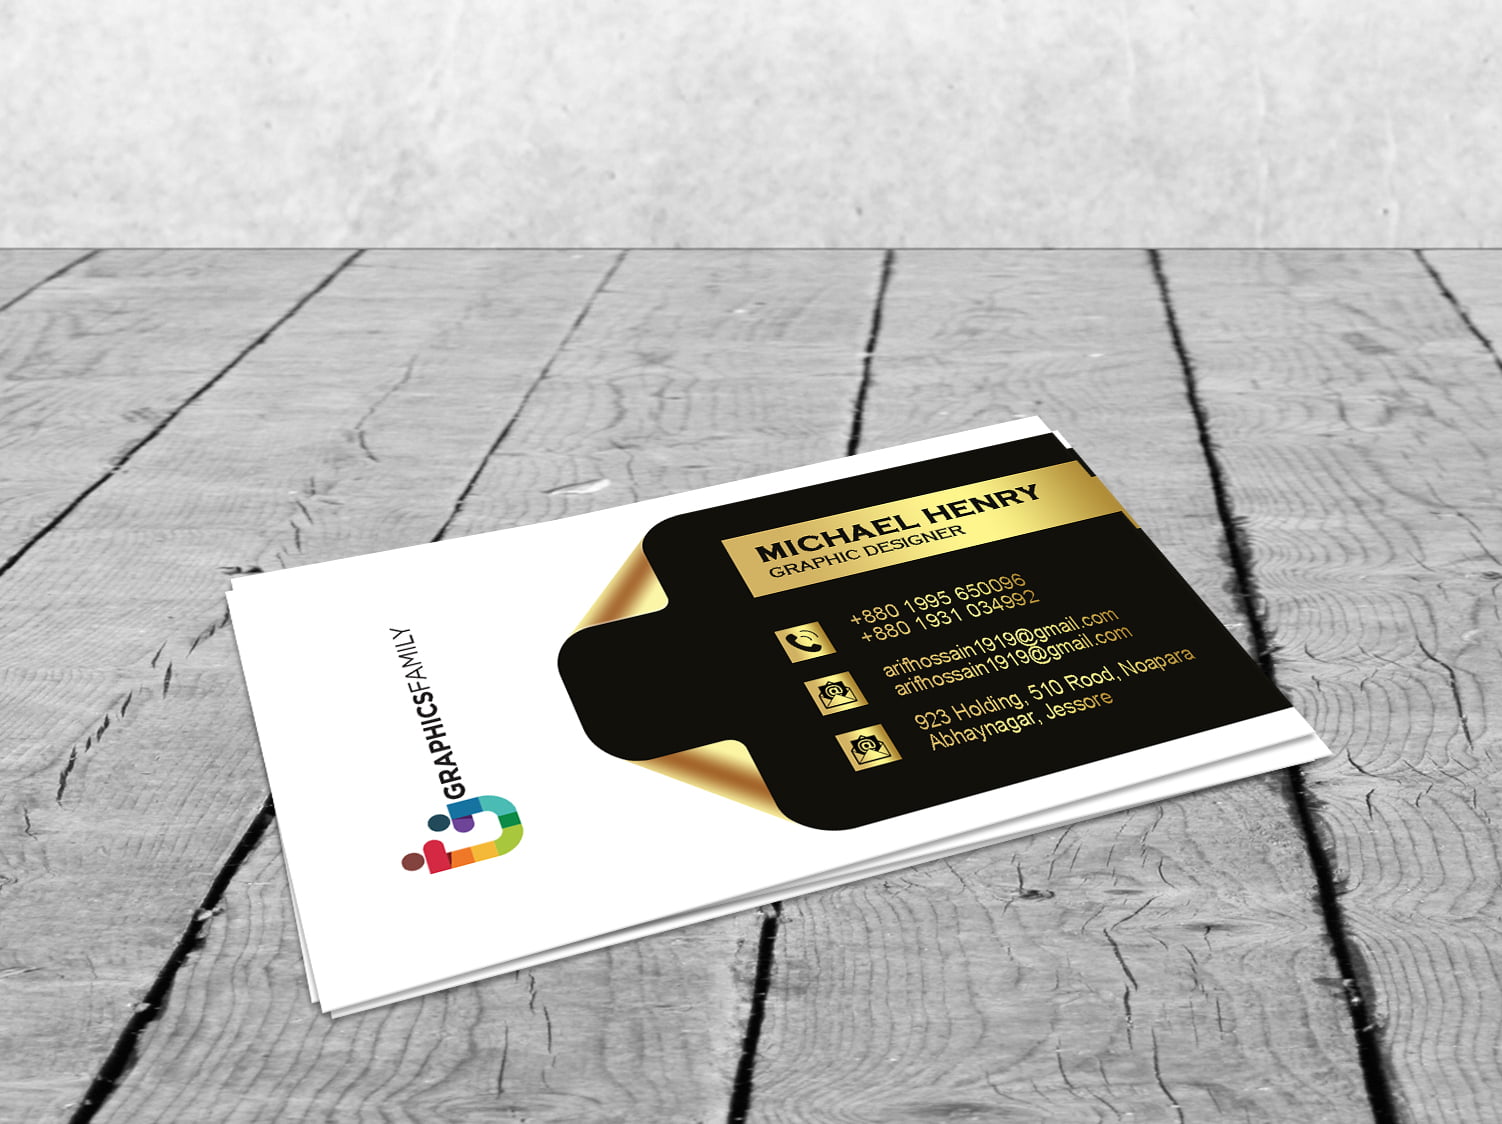 Actuarial Analyst Business Card .PSD Template Download